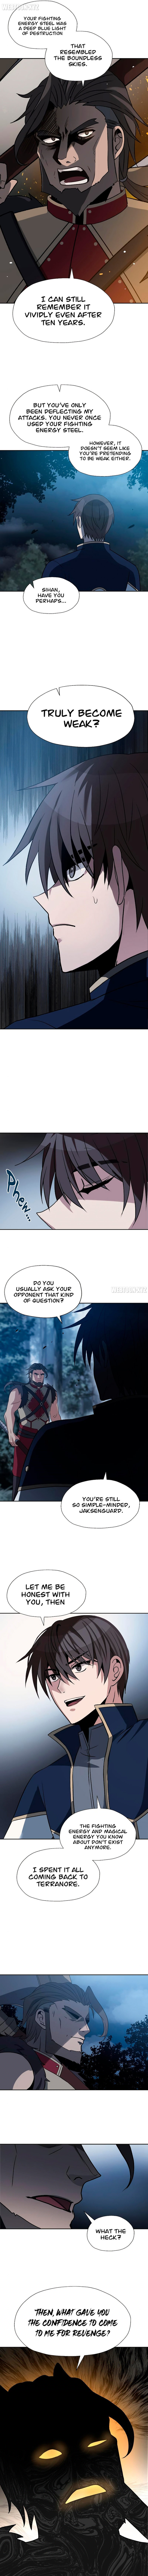 transmigrating-to-the-otherworld-once-more-chap-36-6